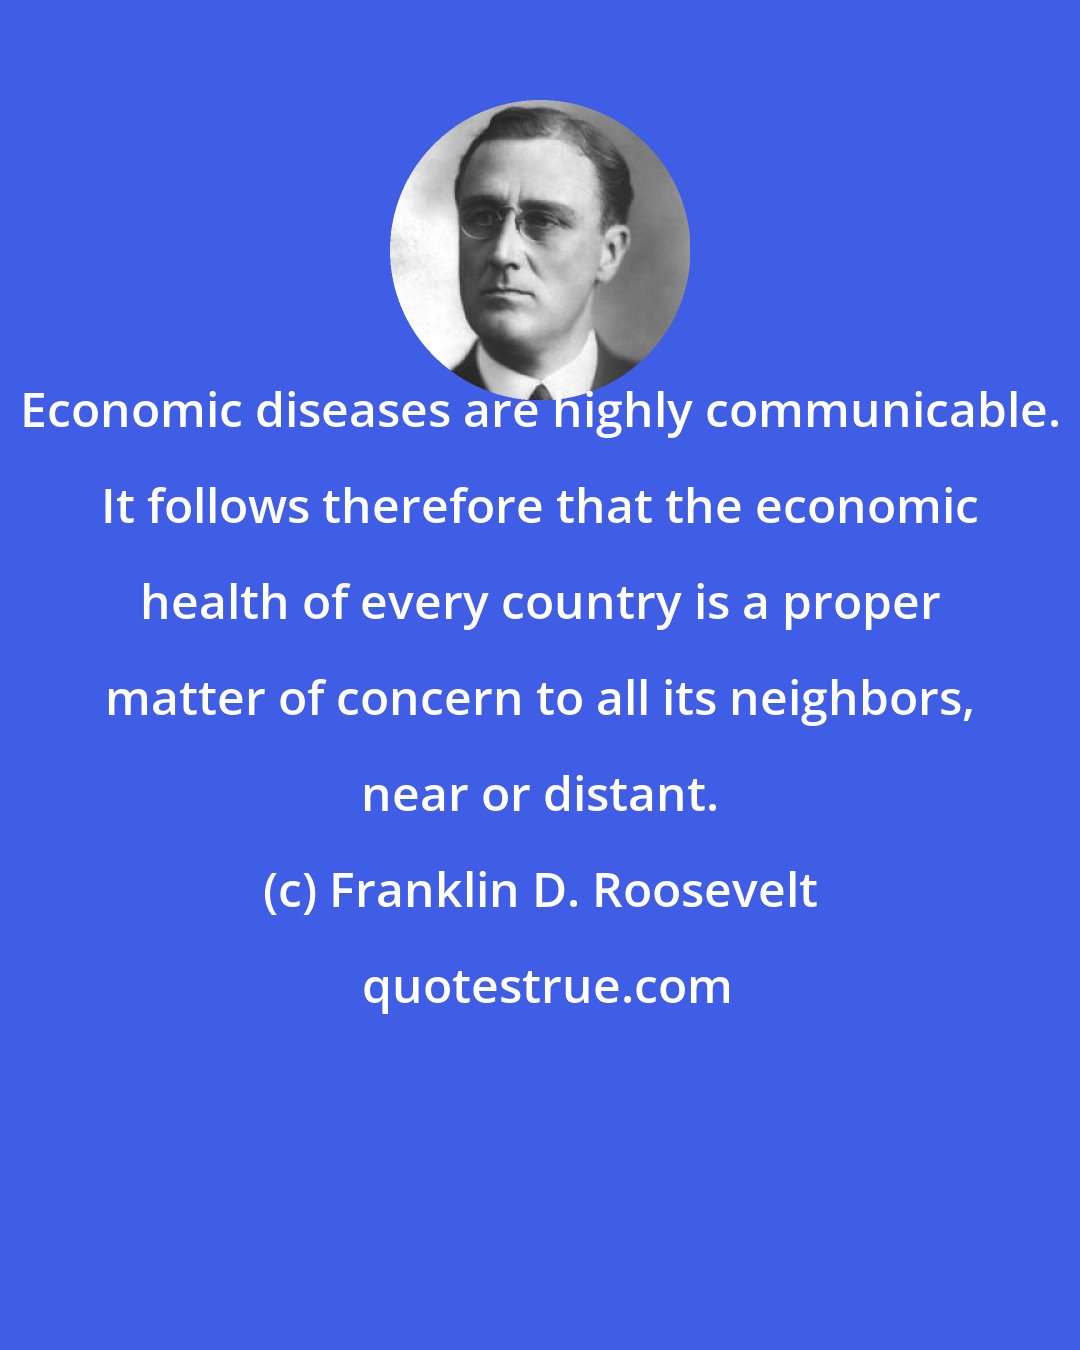 Franklin D. Roosevelt: Economic diseases are highly communicable. It follows therefore that the economic health of every country is a proper matter of concern to all its neighbors, near or distant.